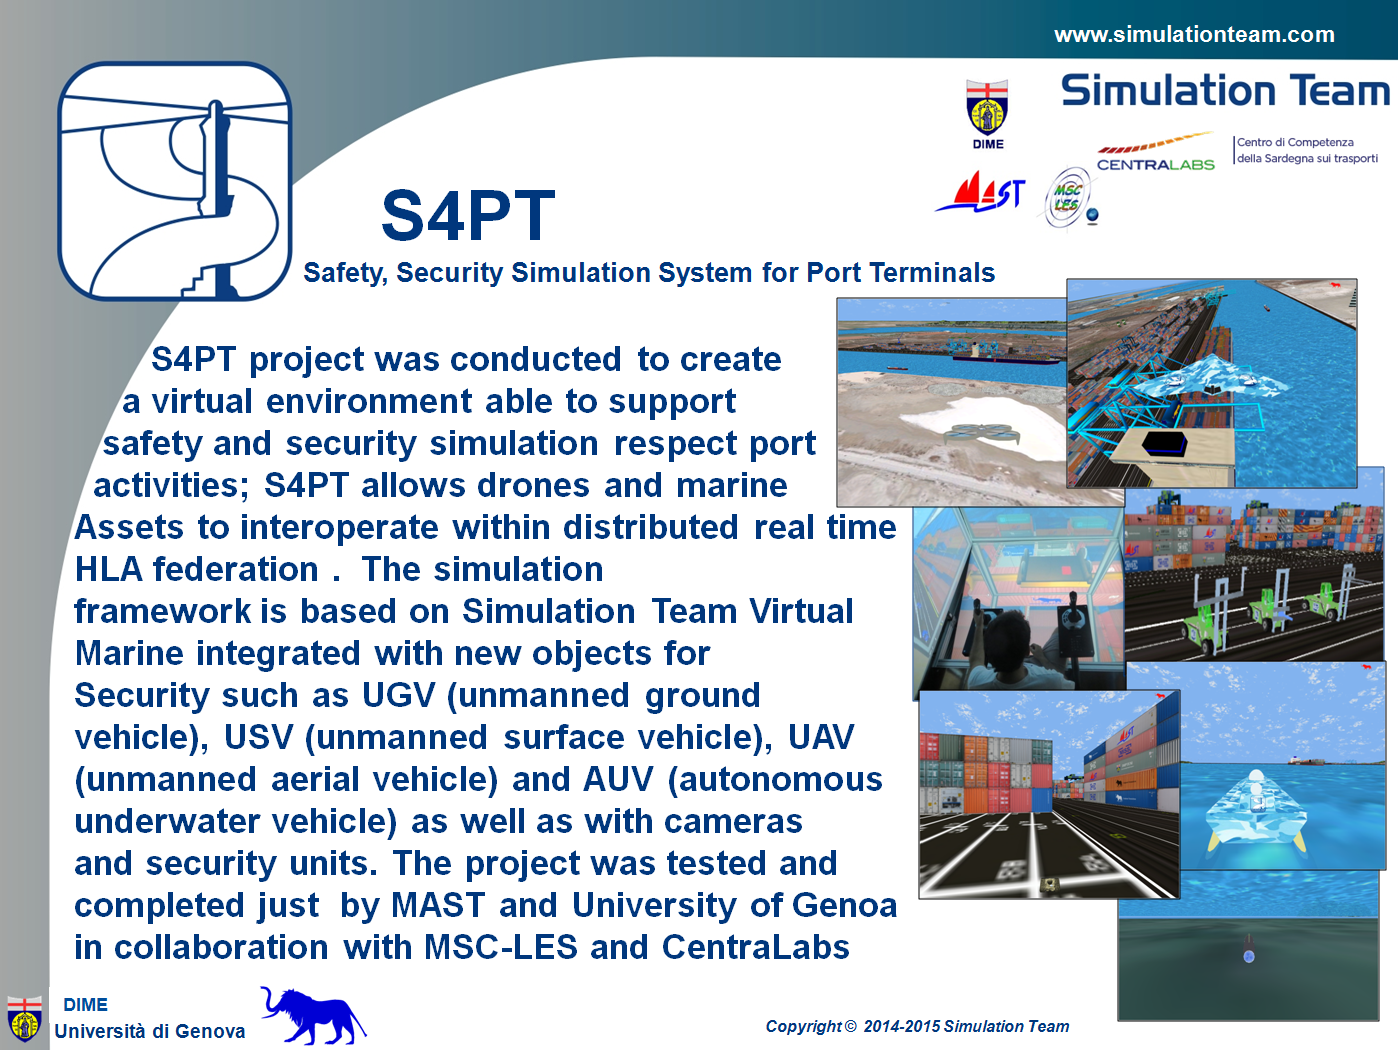 Safety, Security Simulation System for Port Terminals